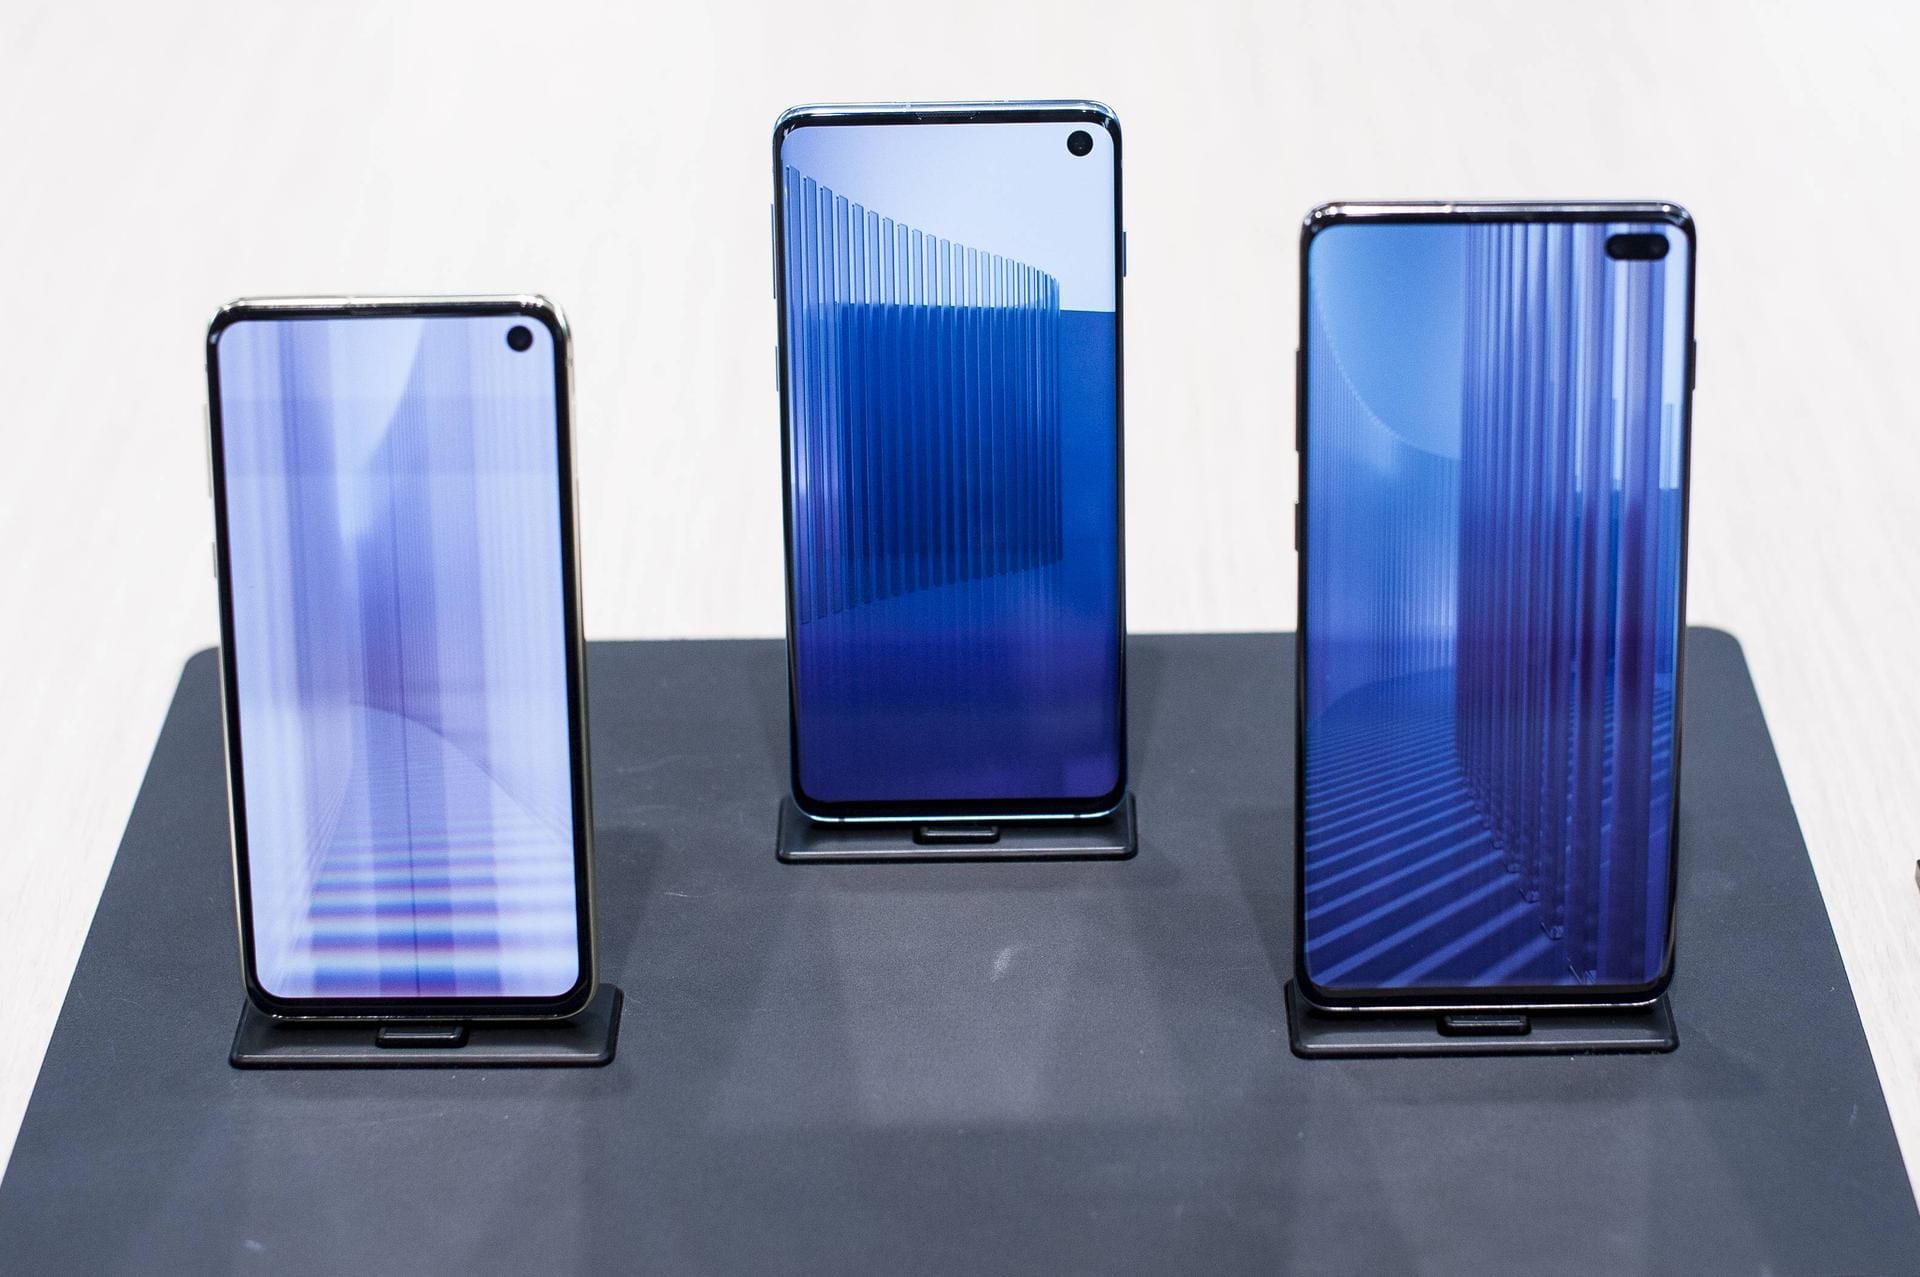 Samsung Galaxy S10e, S10 with 5G and S10+